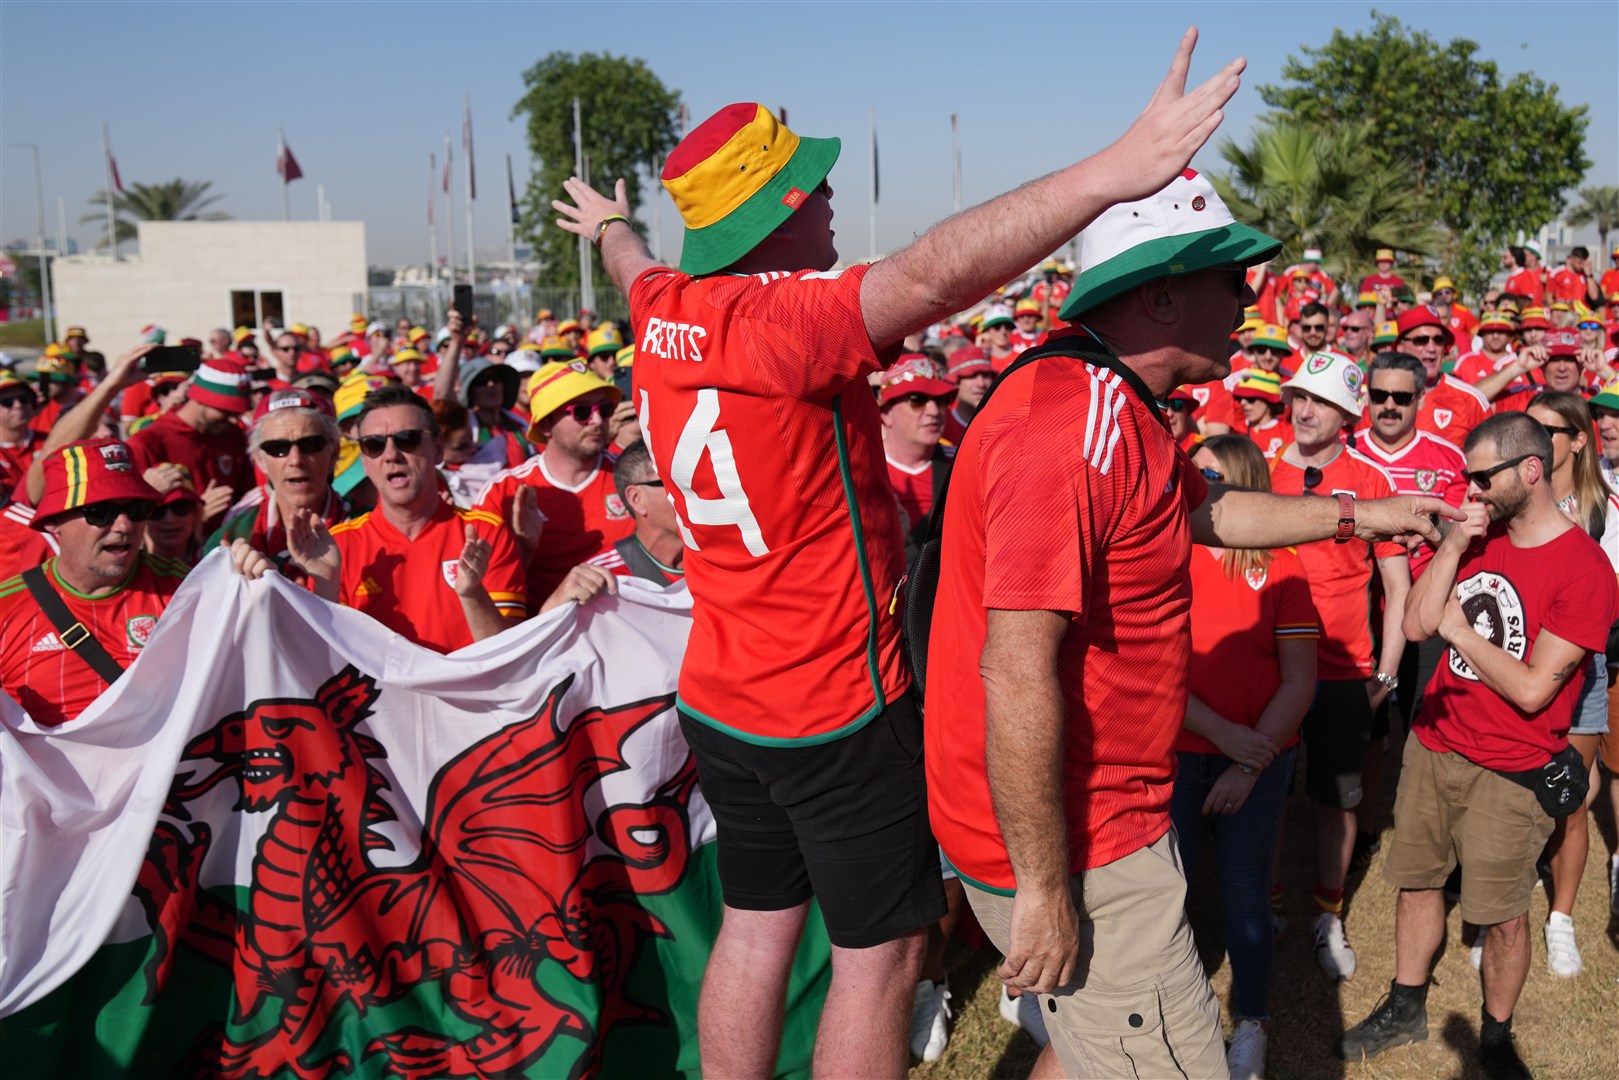 Wales supporters gather at the Corniche Walk Park in Qatar ahead of their team’s Group B game against Iran (Jonathan Brady/PA)